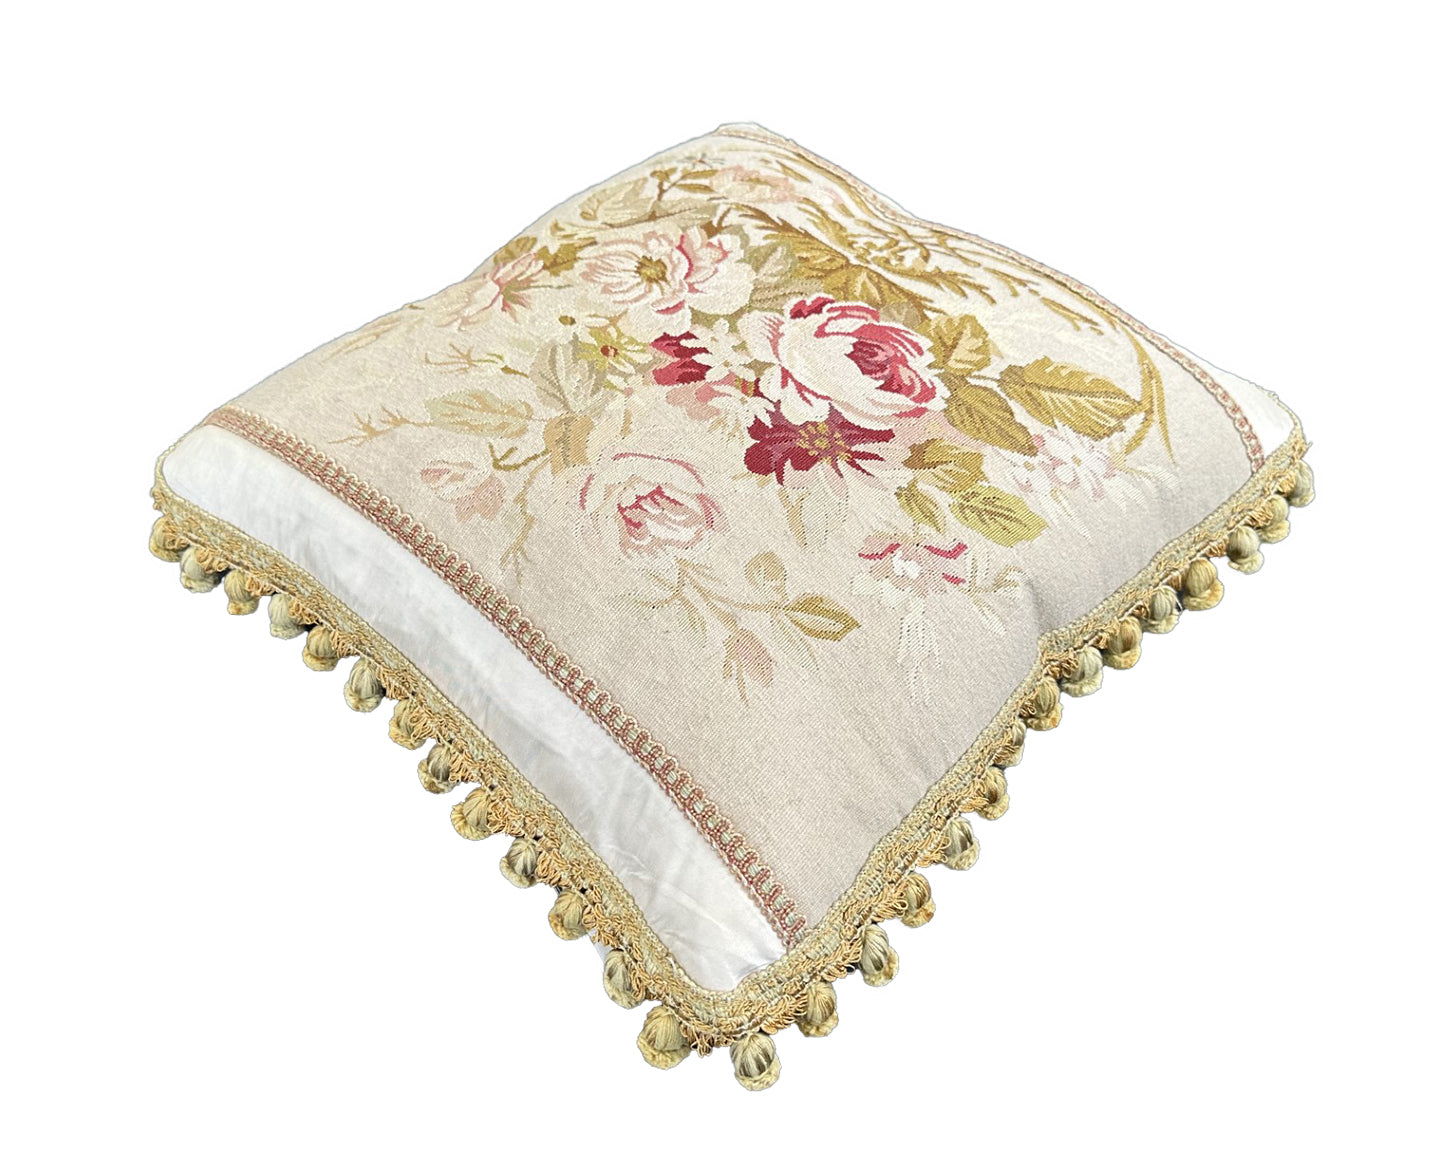 17" x 19" Silk and Wool Hand-woven Aubusson Style Pillow